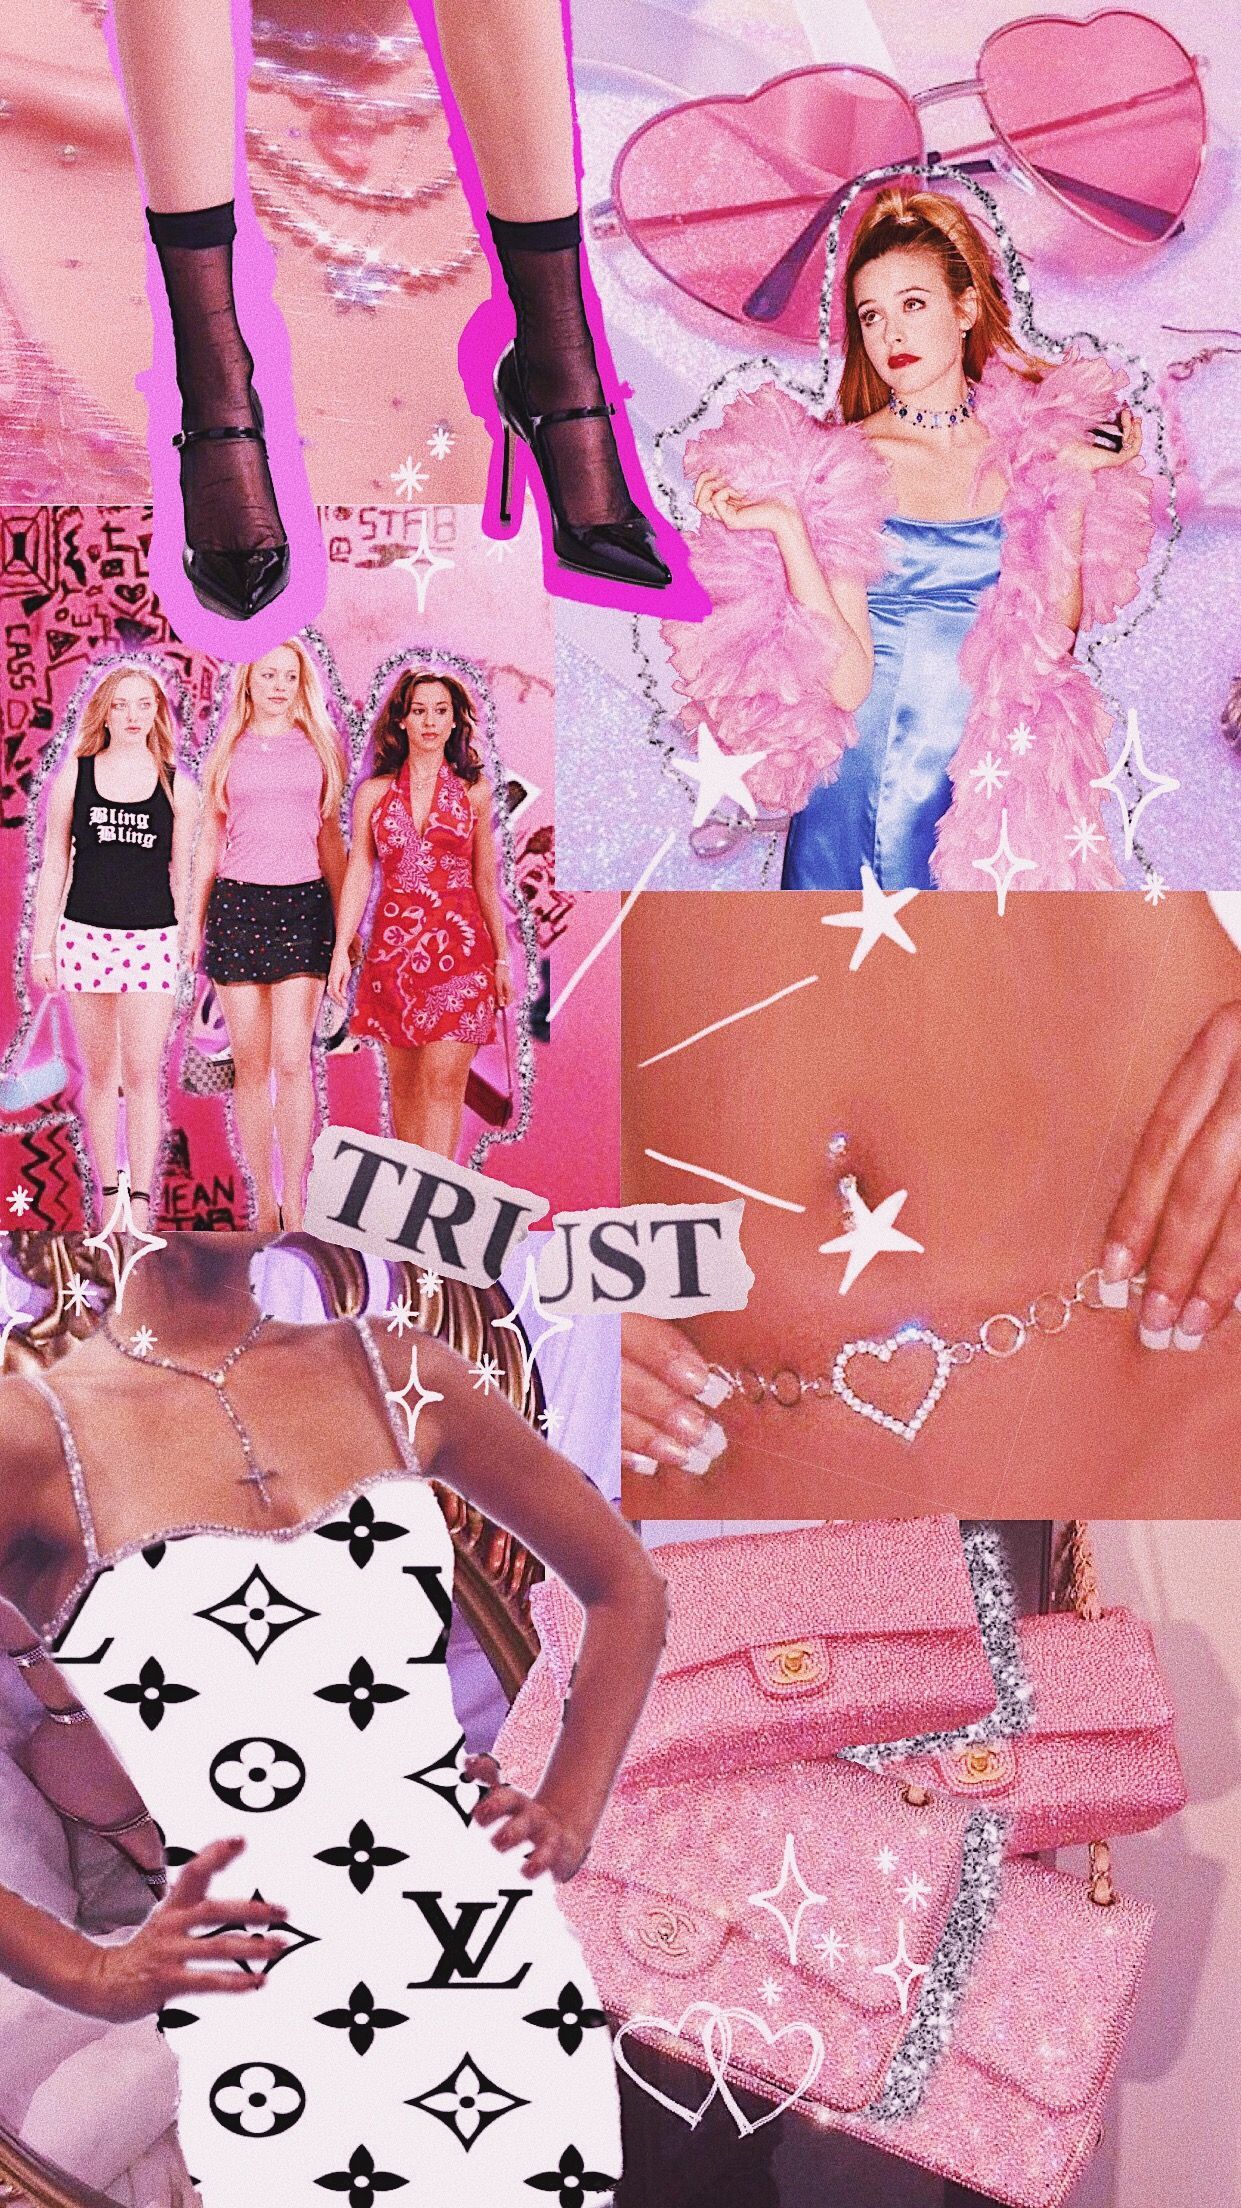 A collage of pink and white fashion items, inspired by the movie Clueless. - 2000s